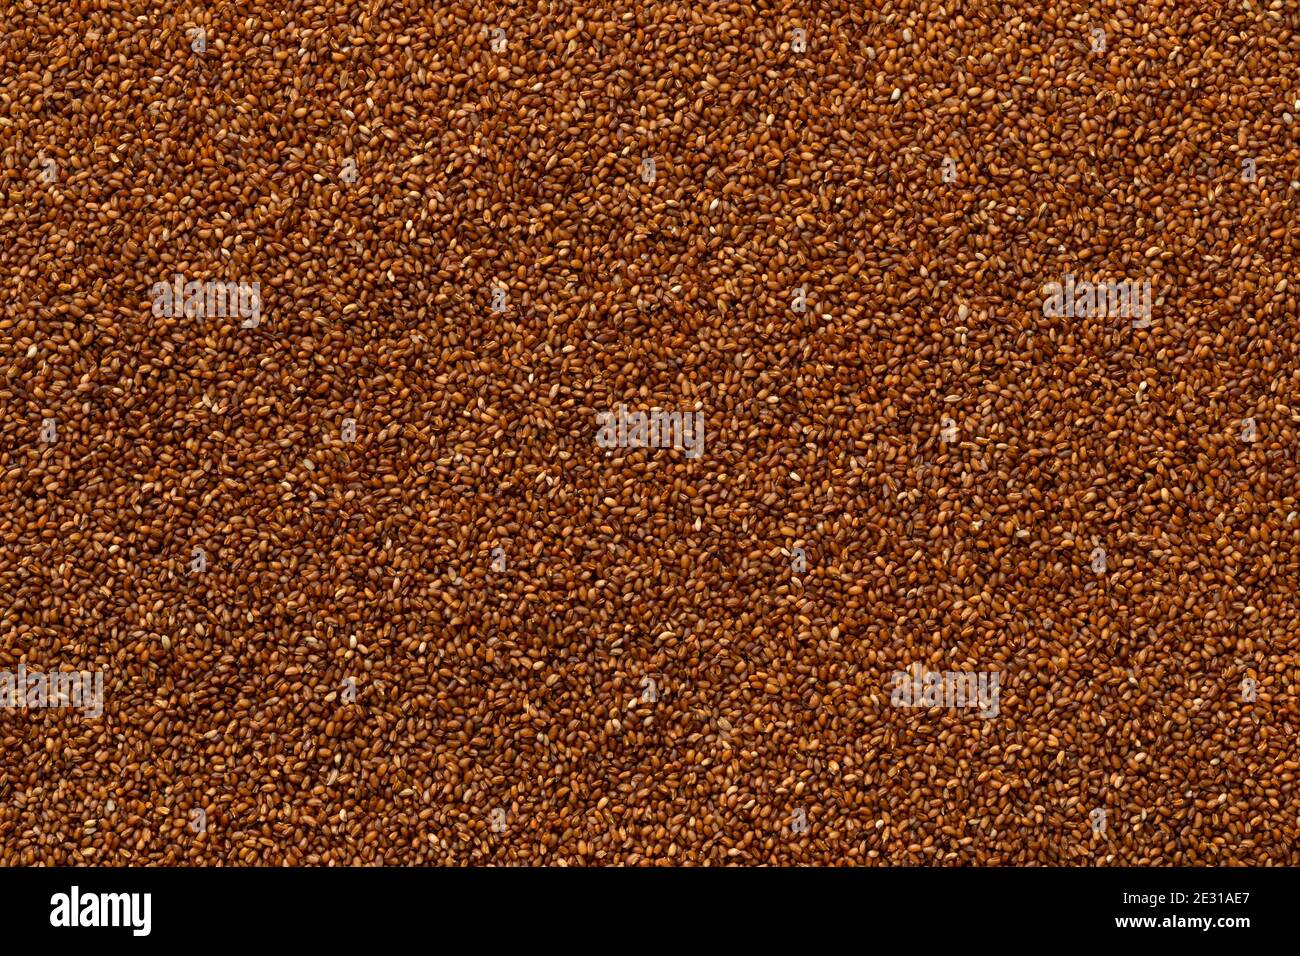 Teff raw edible seed close up full frame as a background Stock Photo